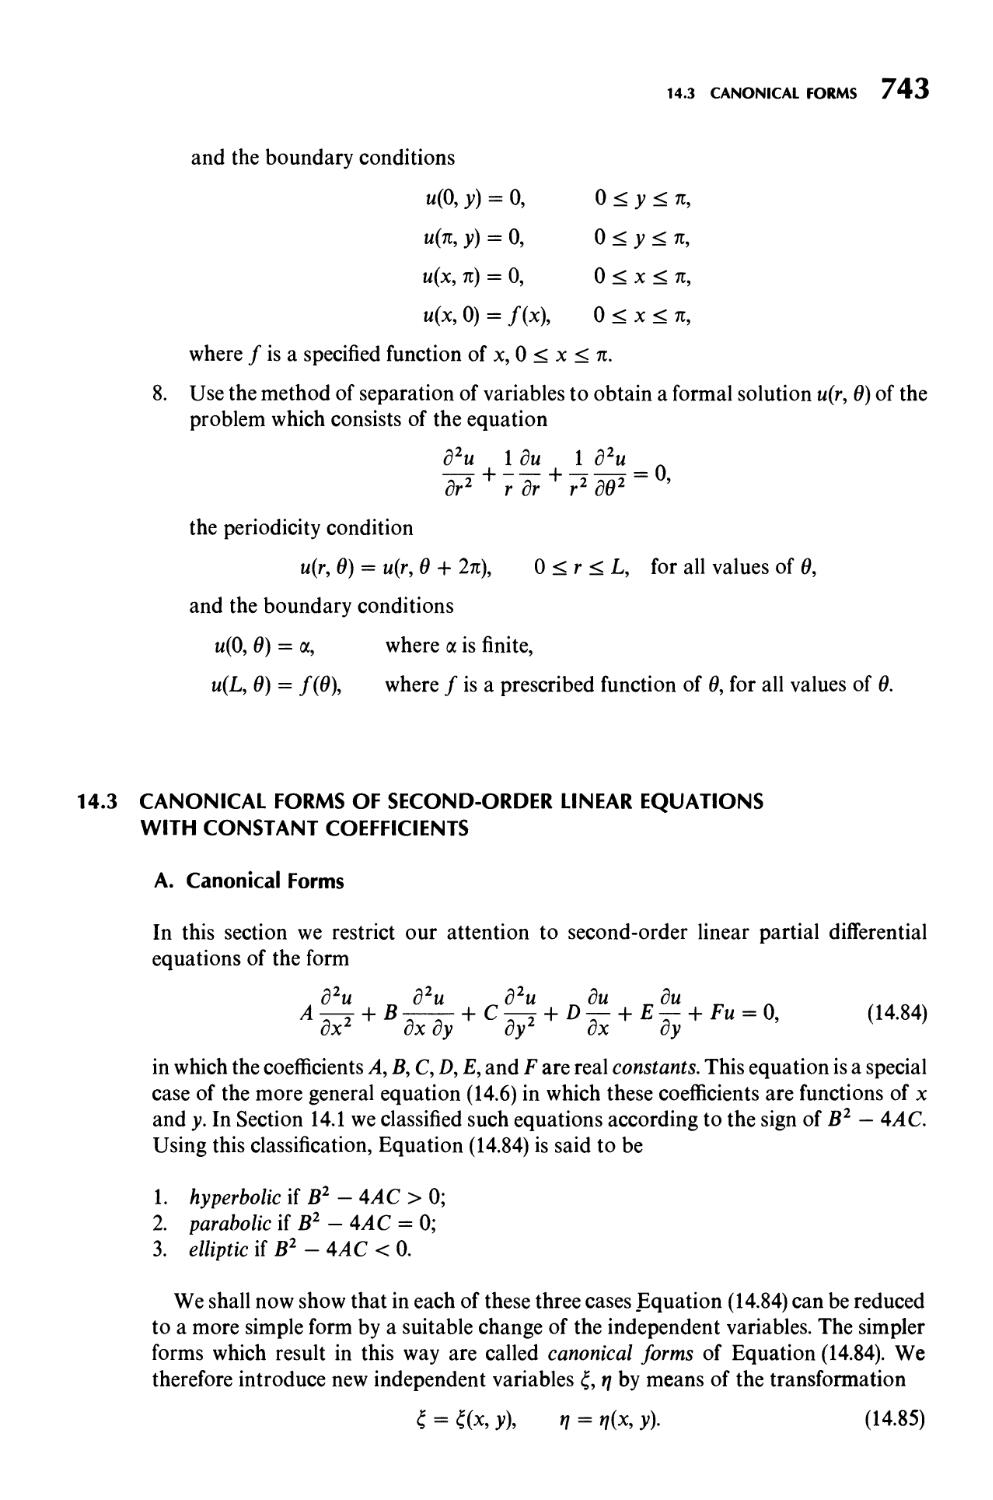 14.3  Canonical Forms of Second-Order Linear Equations with Constant Coefficients